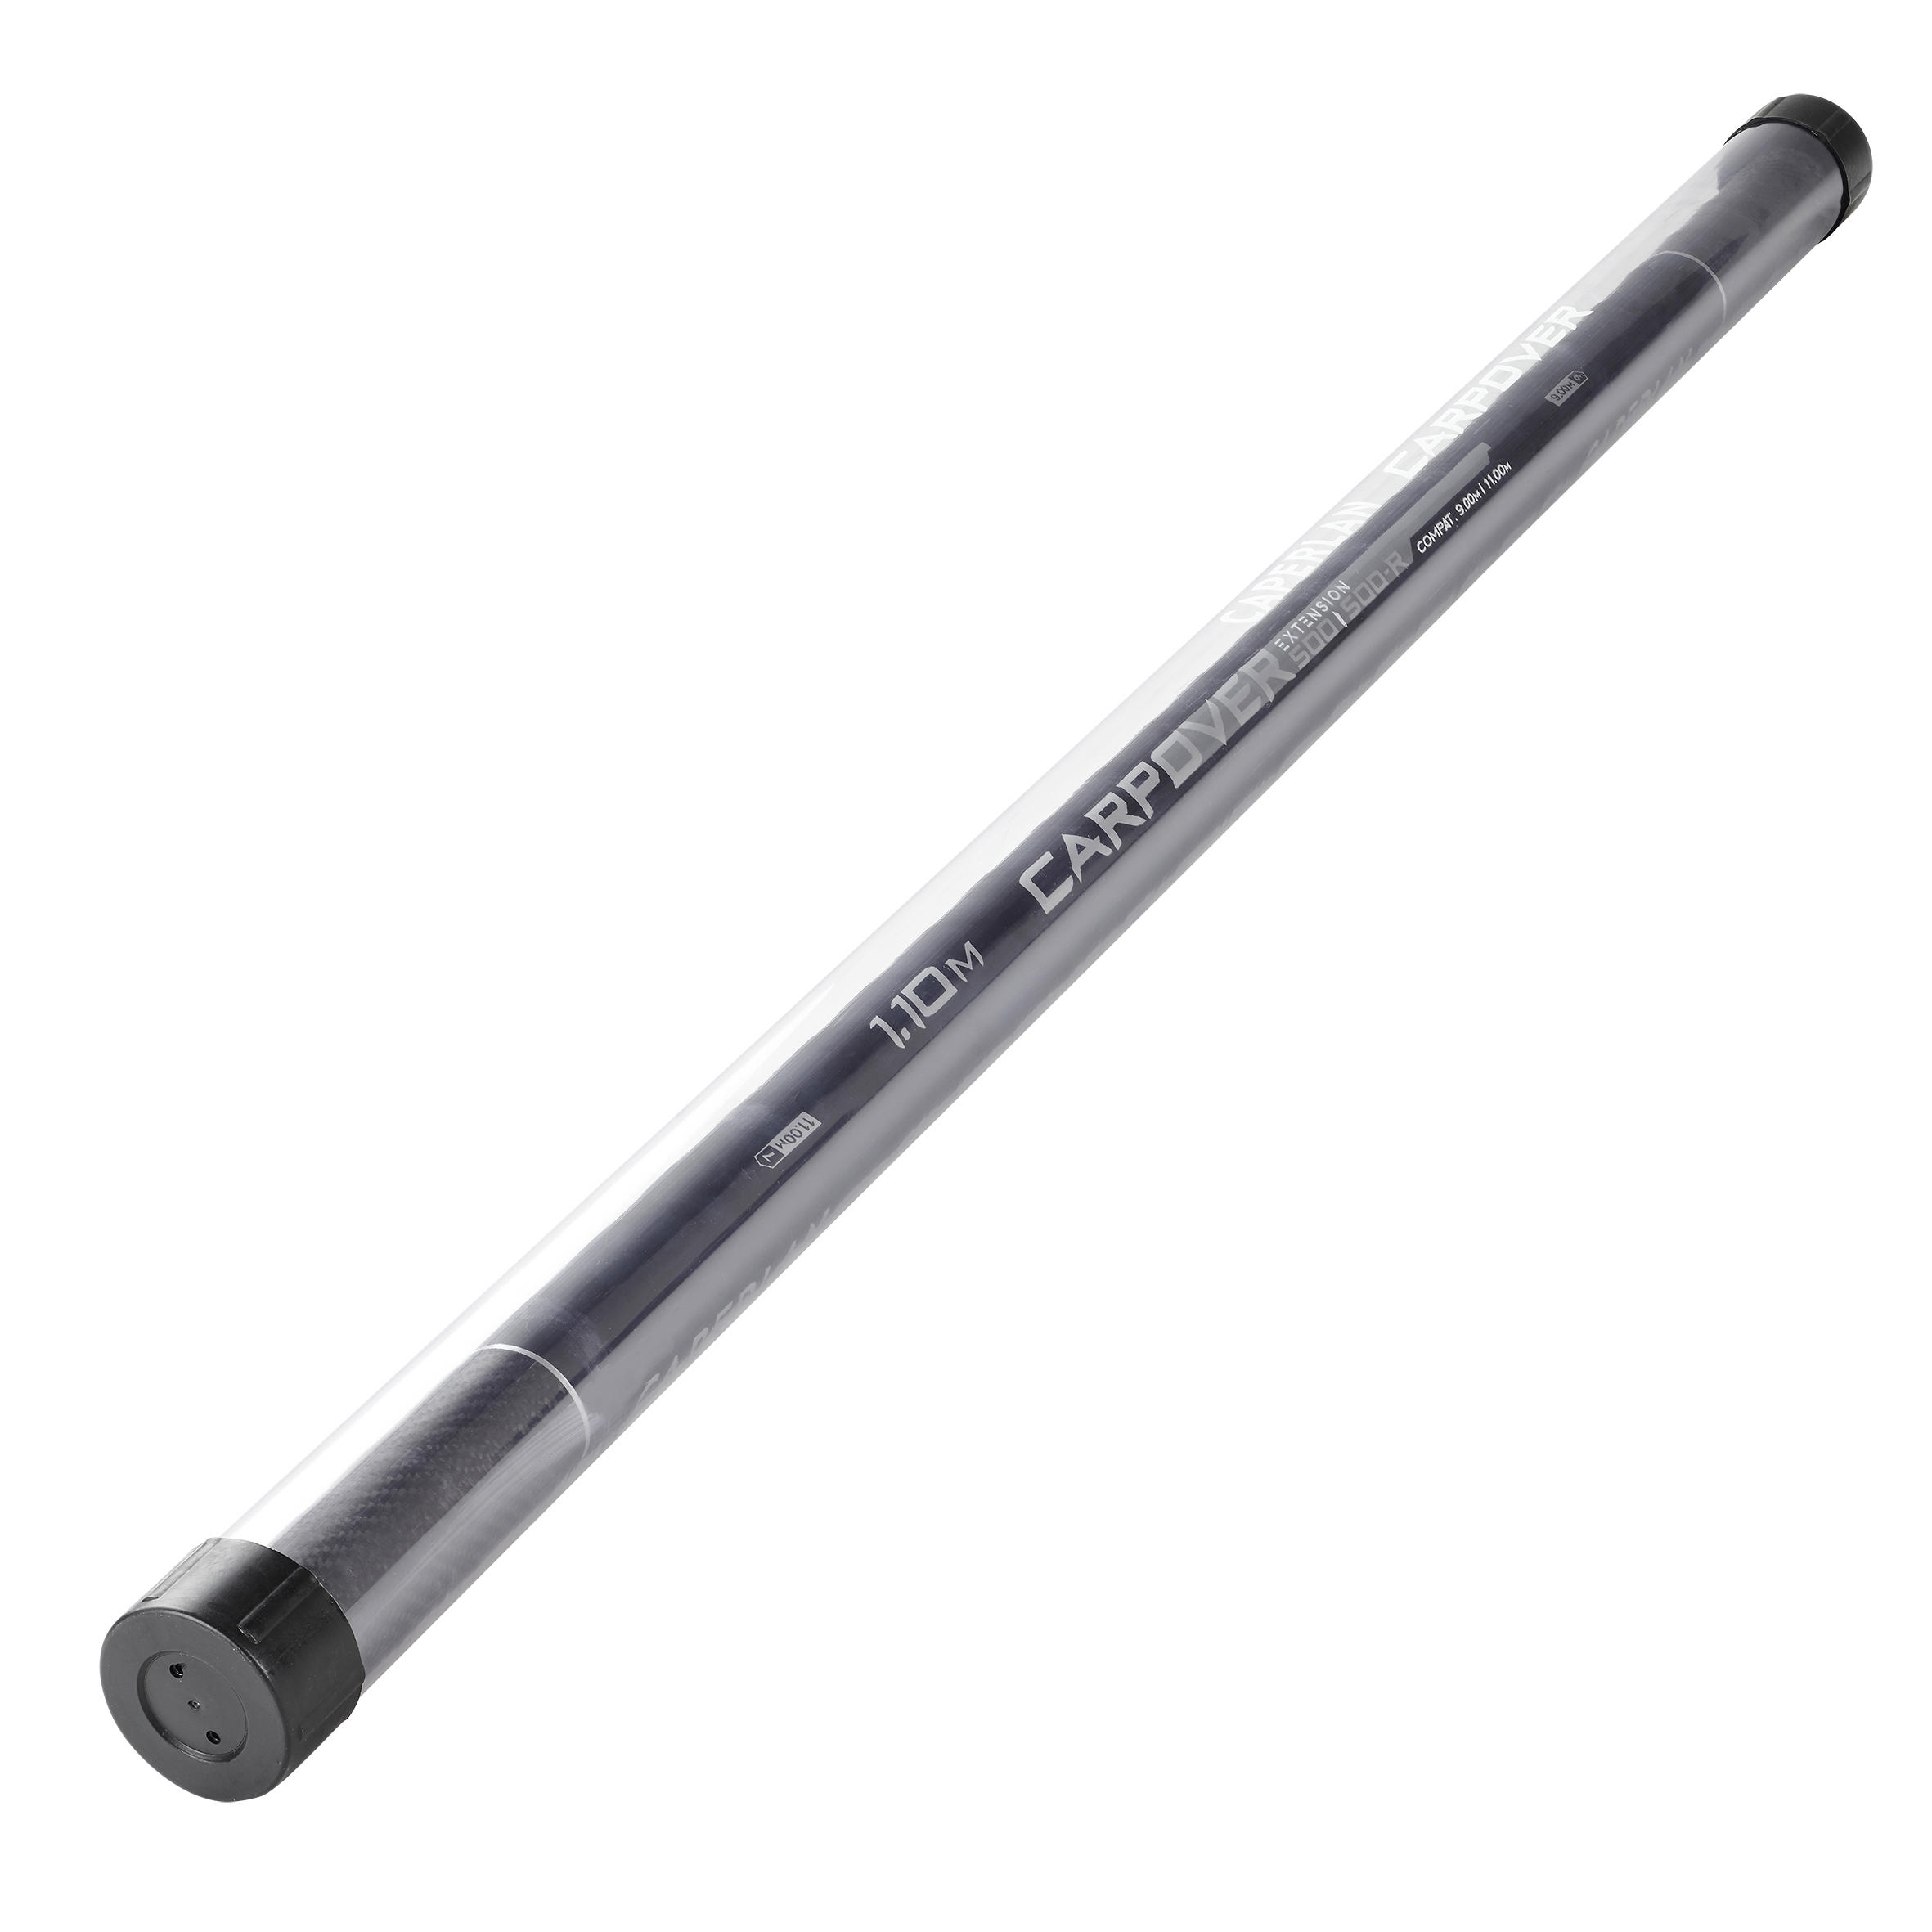 EXTENSION 1.1M  FOR RODS CARPOVER-500 AND 500R 7/8